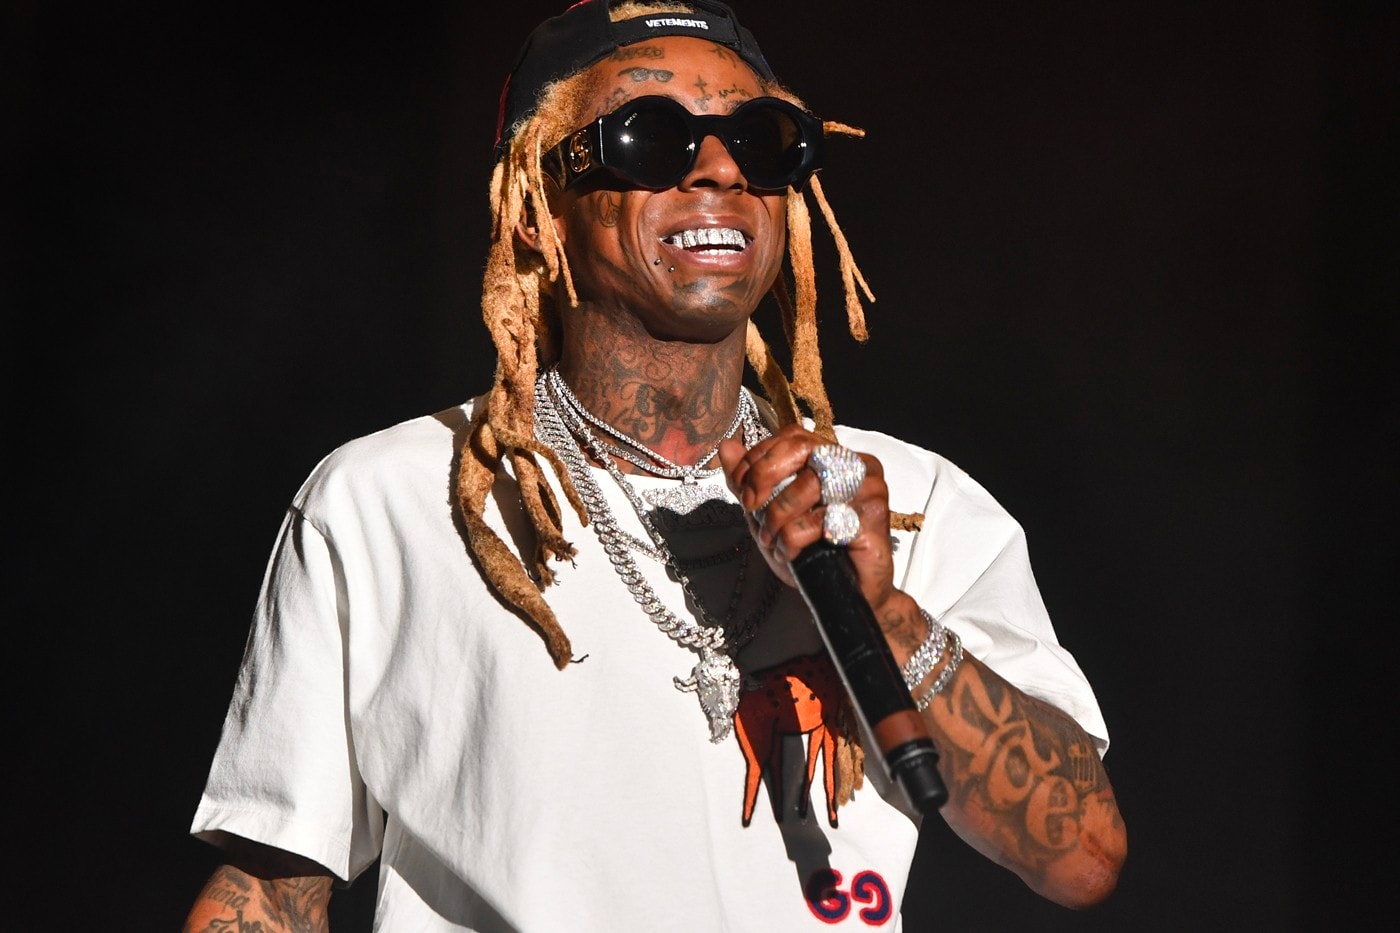 Lil Wayne Confirms No Ceilings 3 Tha Carter VI funeral collegrove 2 tuneechi weezy ymcmb